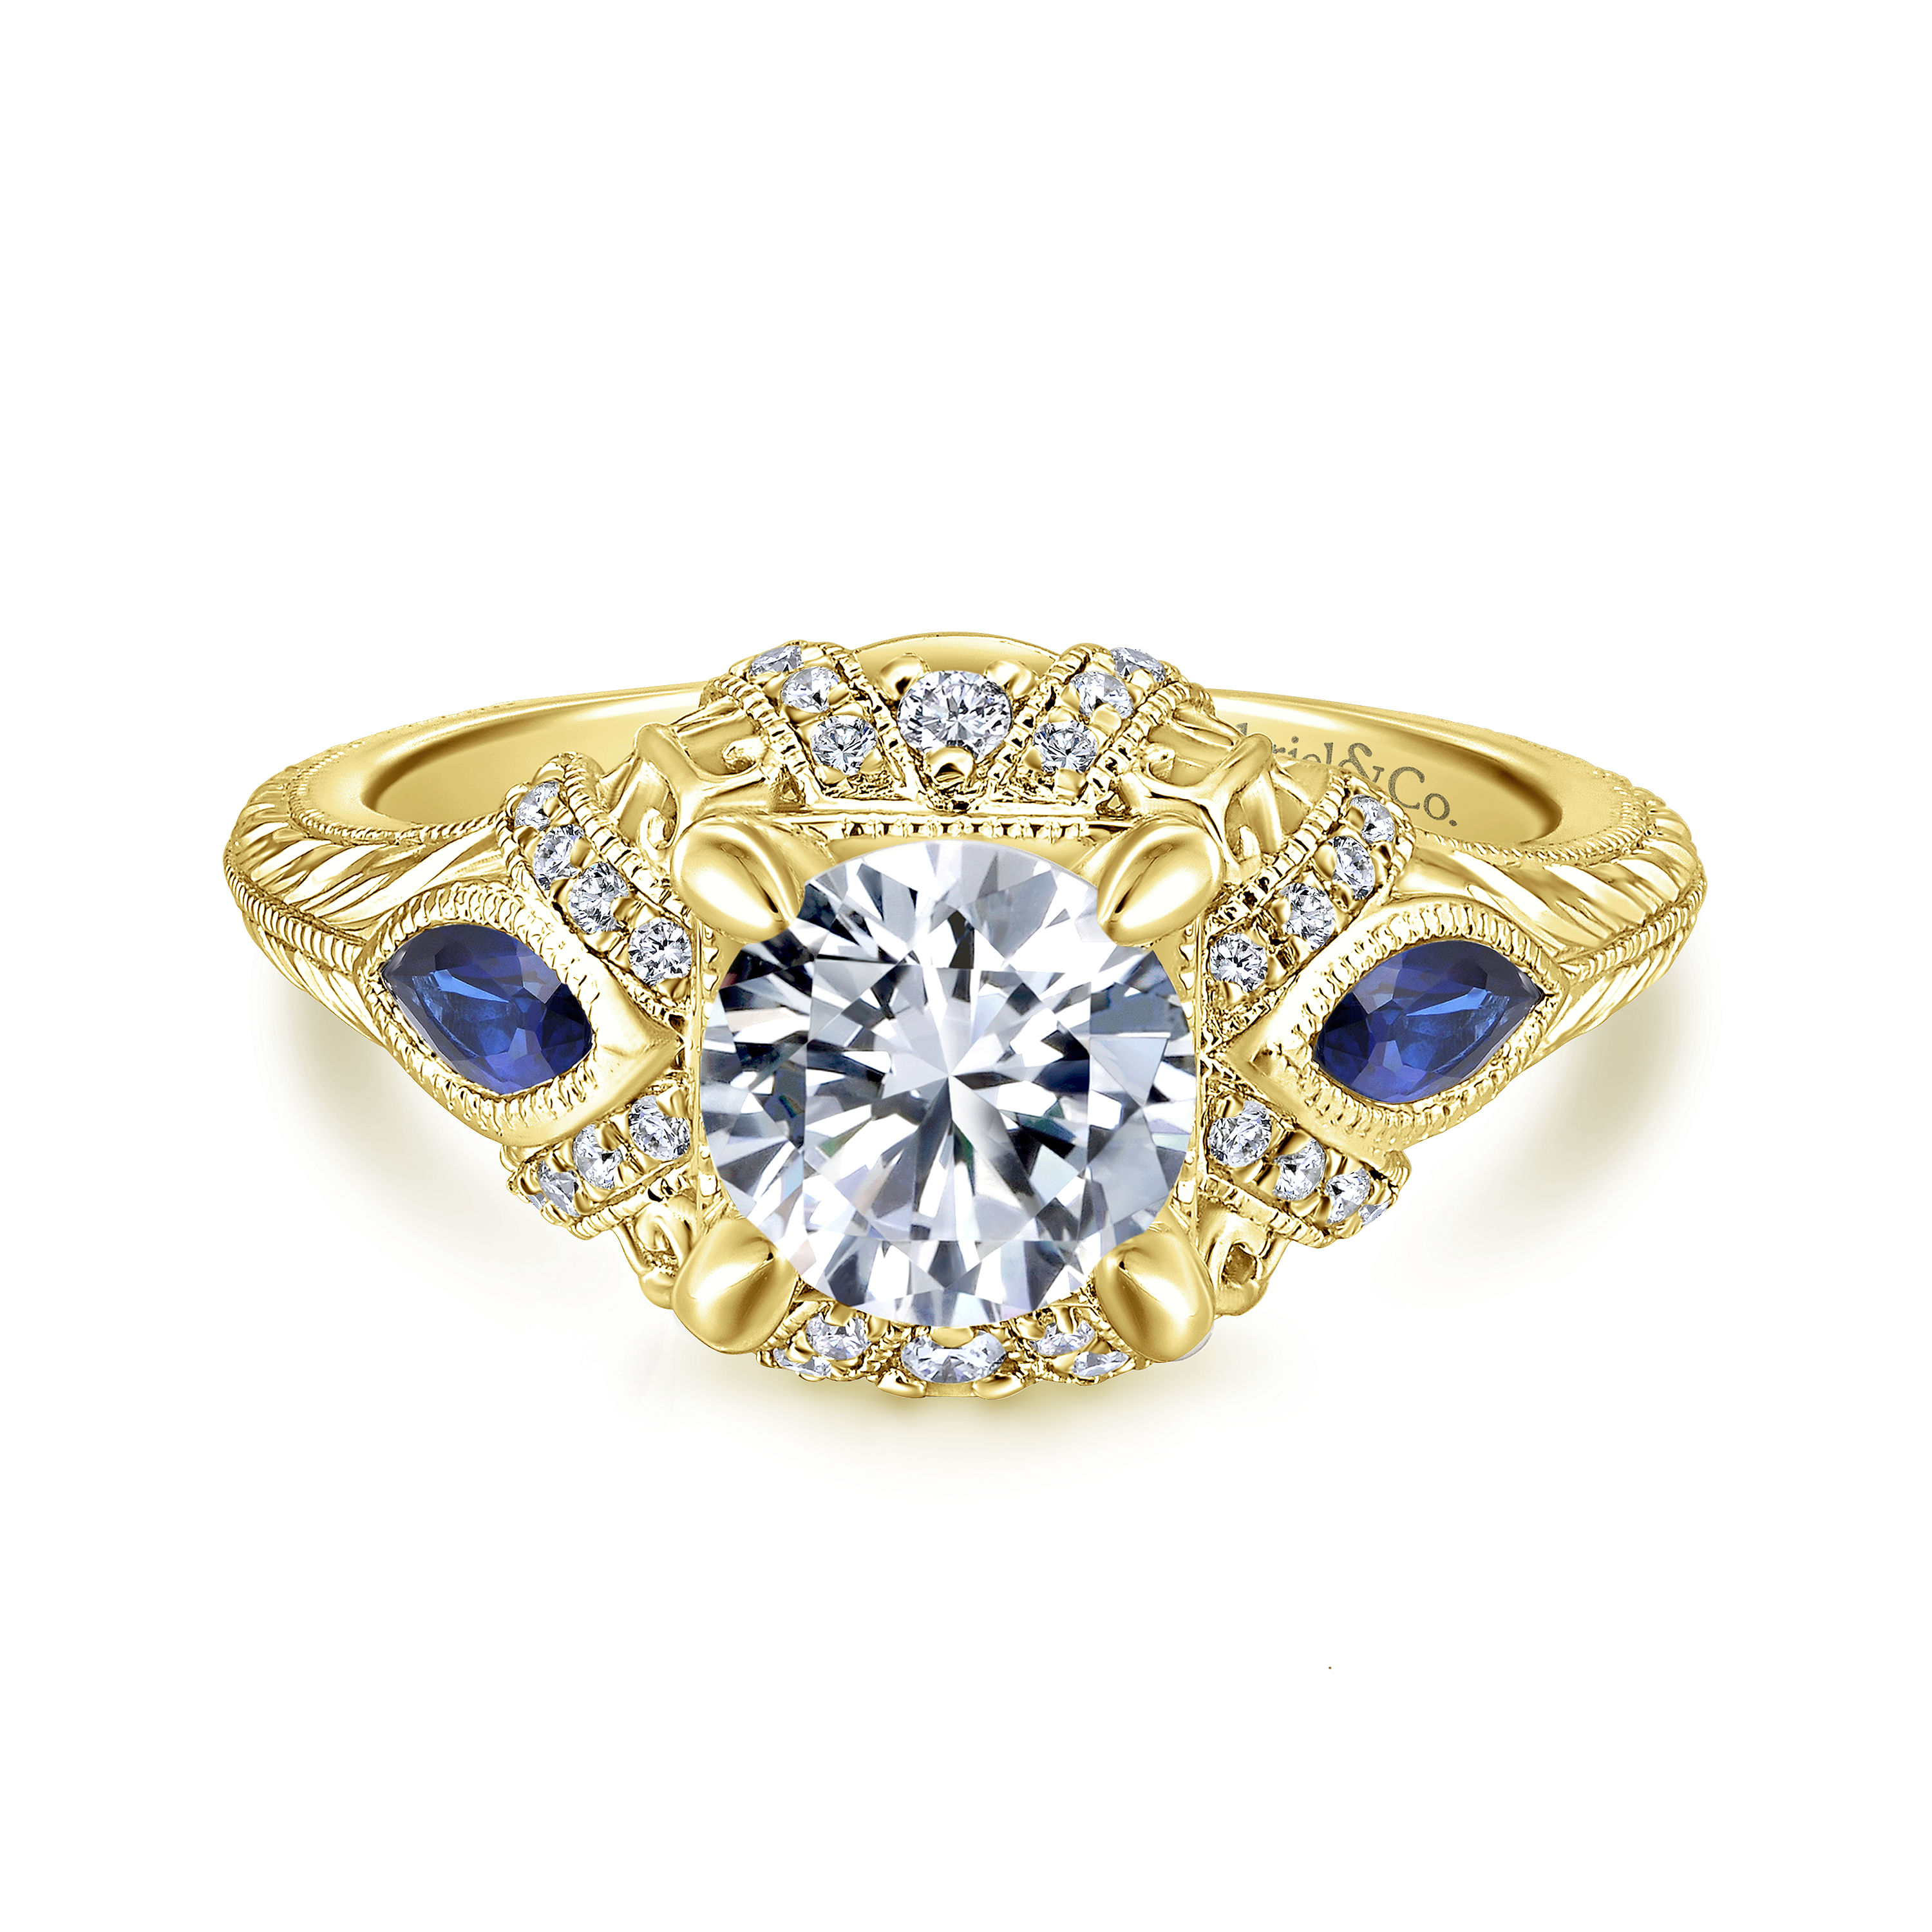 Vintage Inspired 14K Yellow Gold Round Three Stone Halo Diamond and Sapphire Engagement Ring